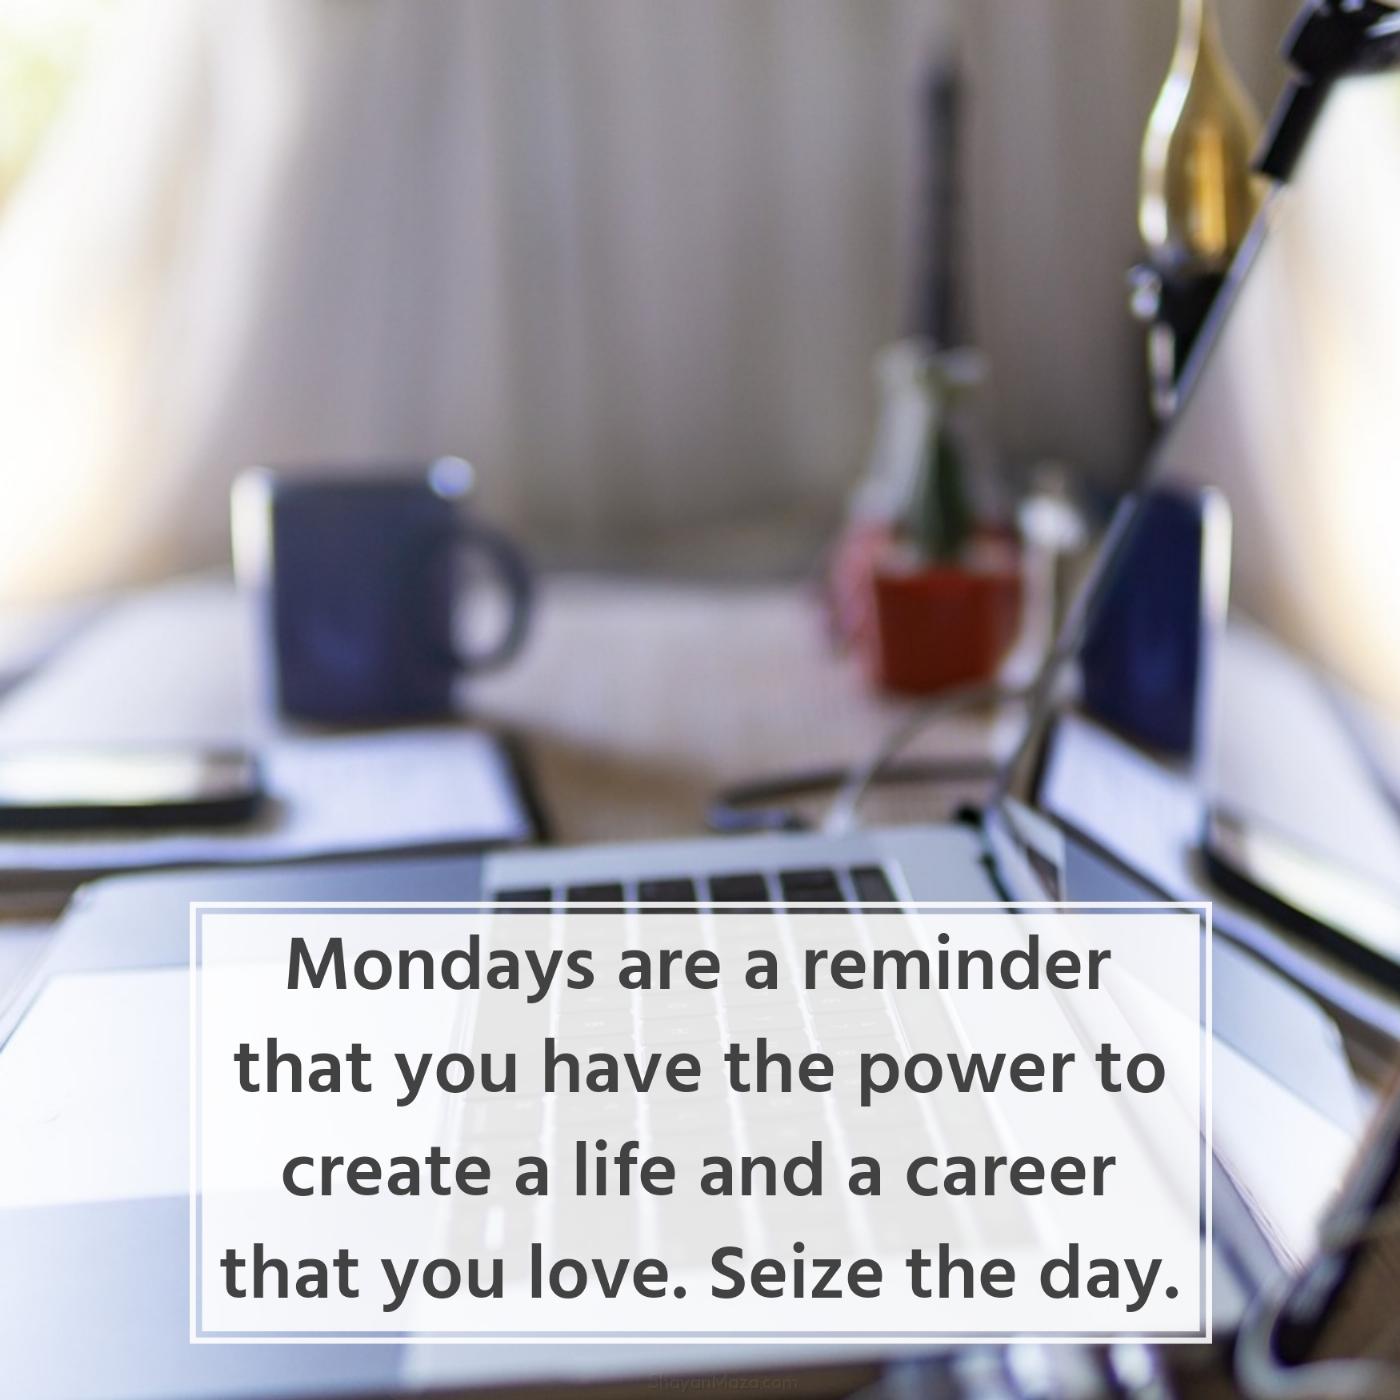 Mondays are a reminder that you have the power to create a life